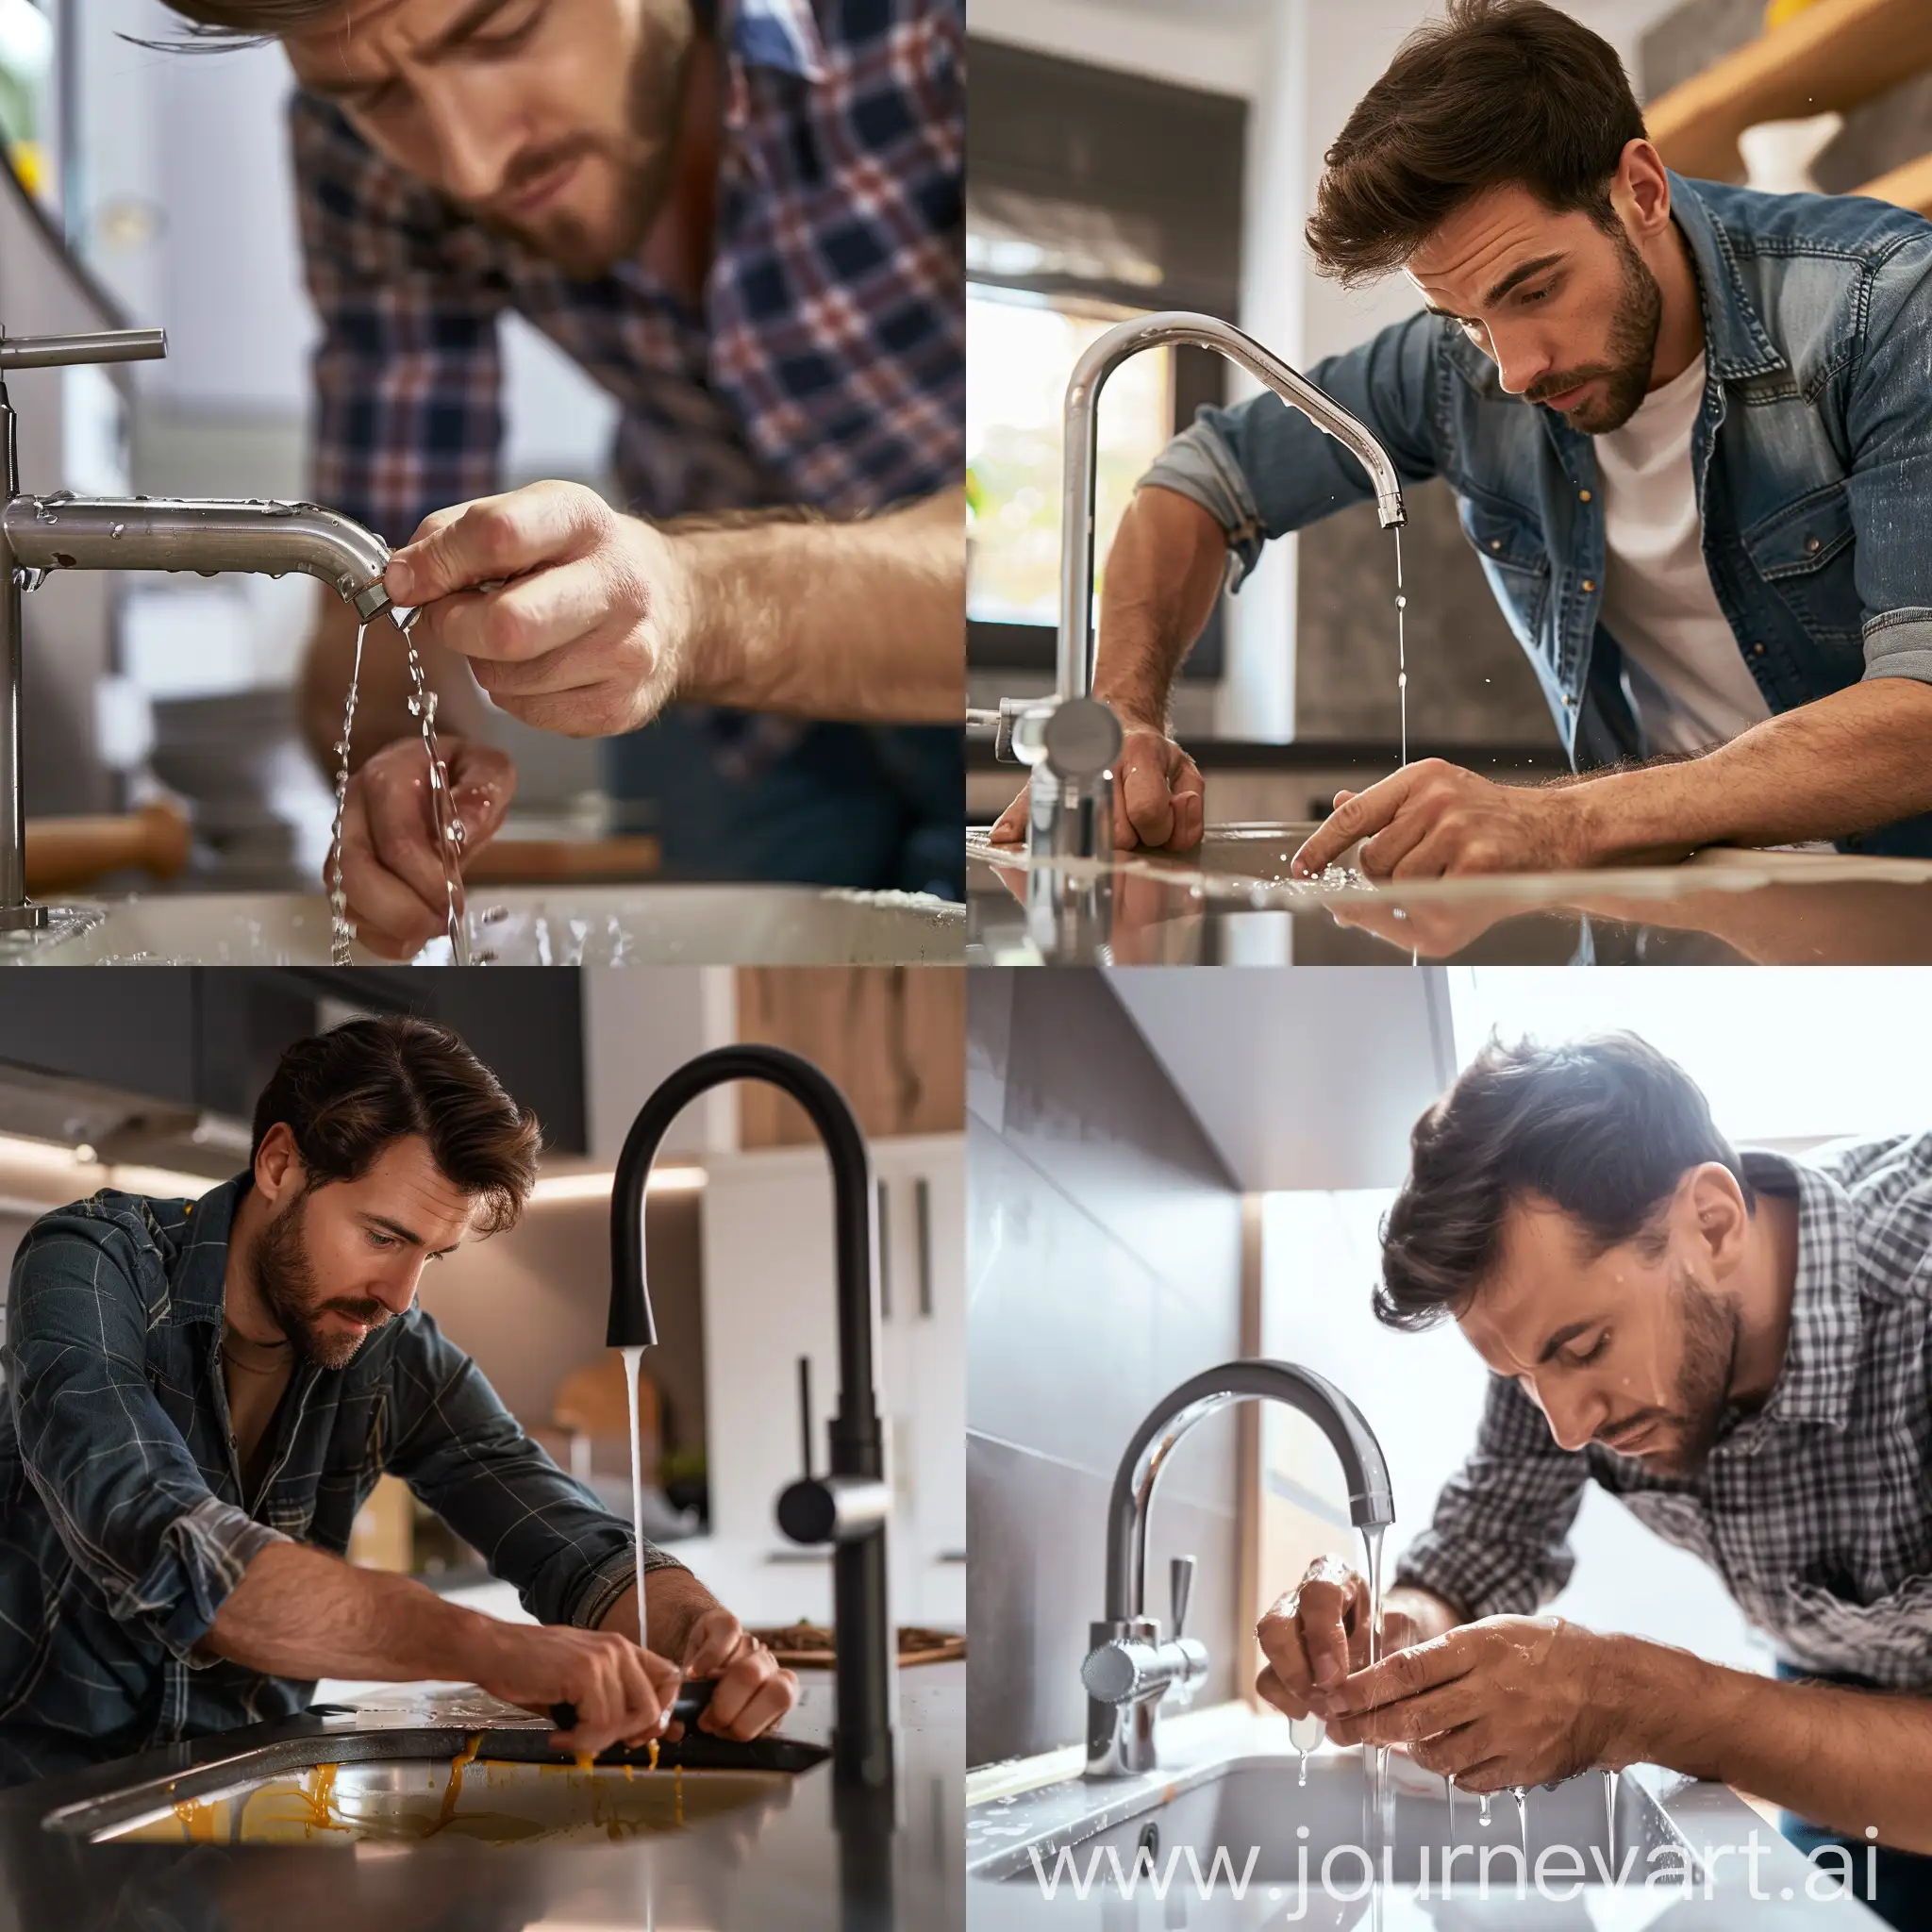 A man is struggling with a leaking sink